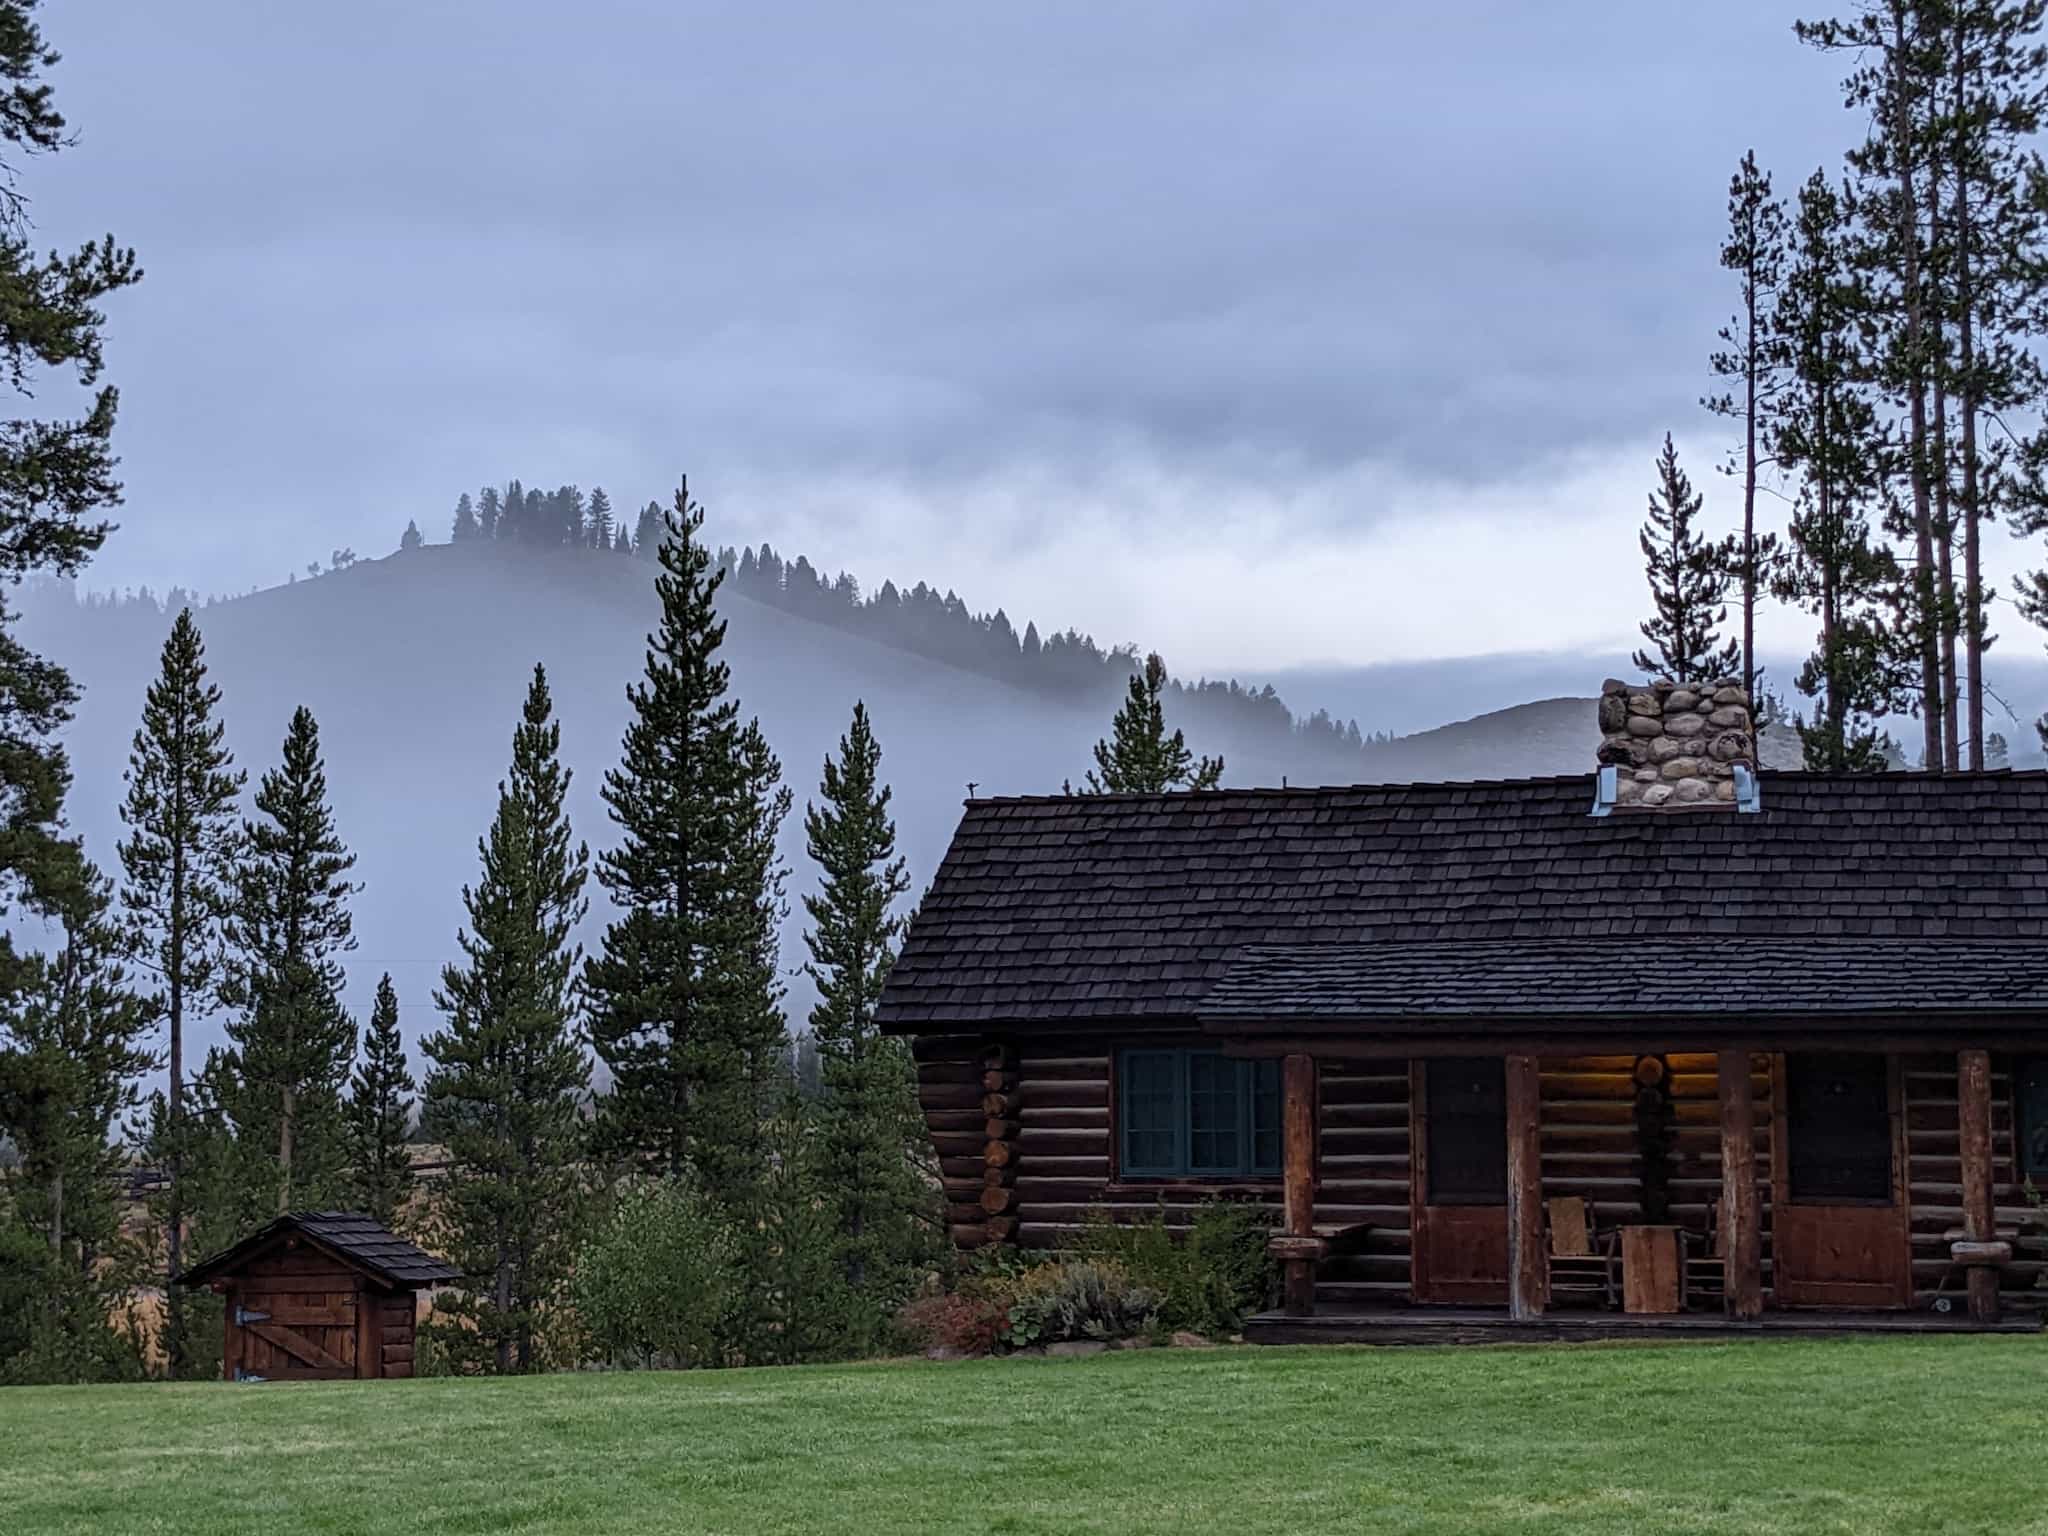 cabin surrounded by tall pine trees with grass lawn in front and hazy view of hill behind